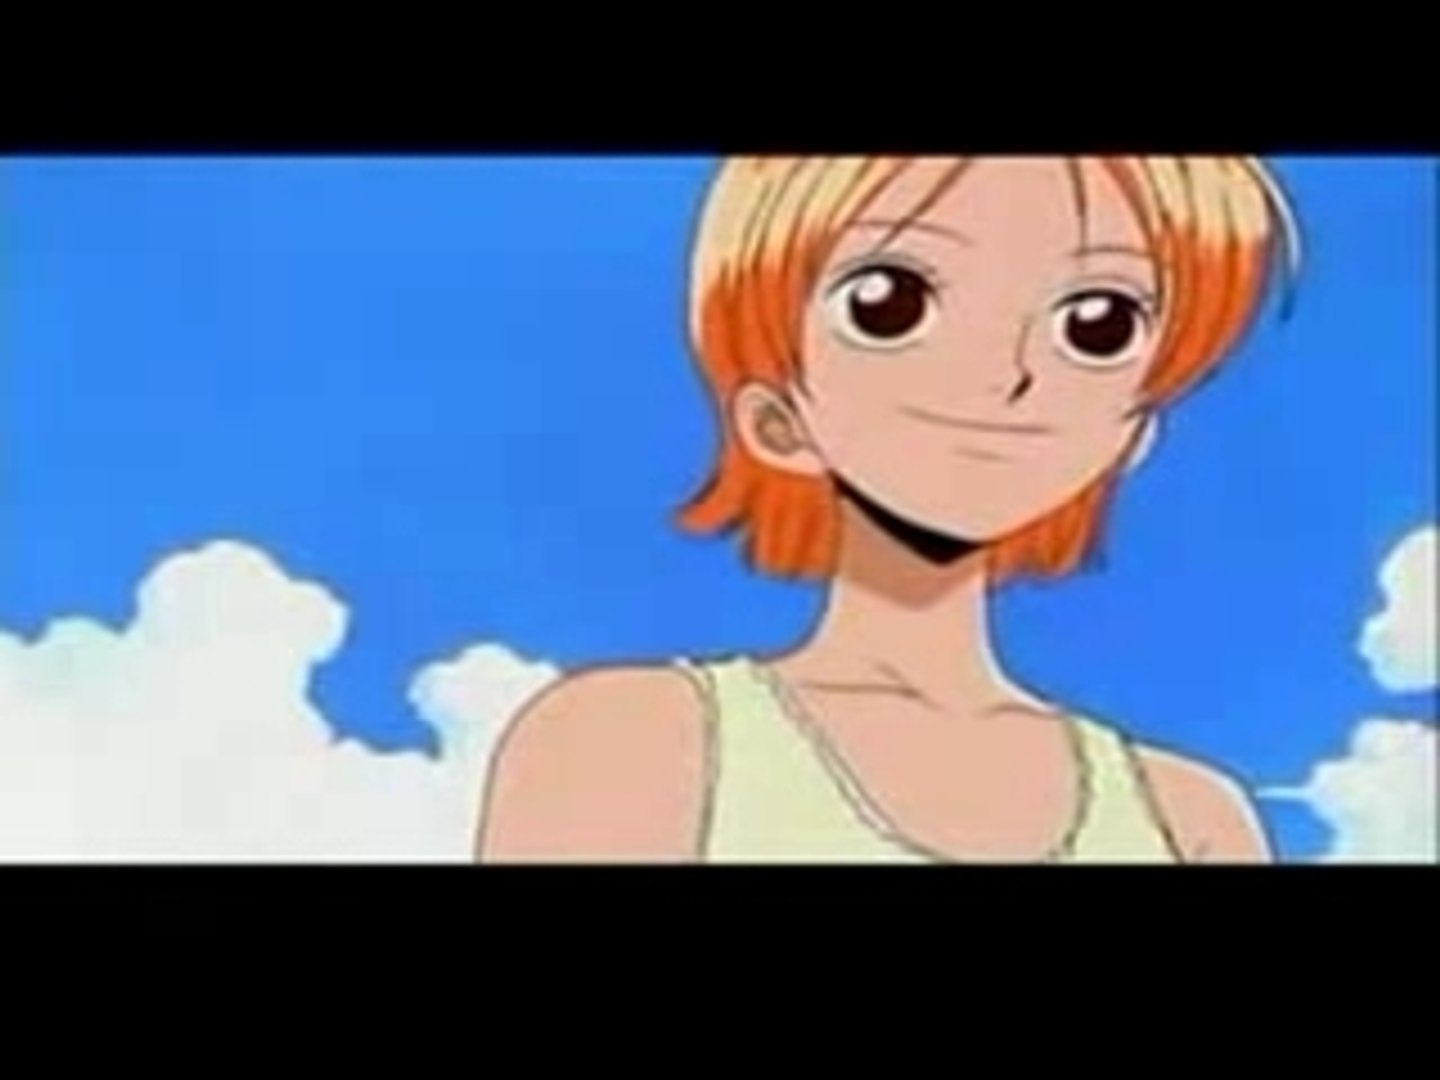 Monkey D. Luffy X Nami - Luffy and Nami❤🧡One Piece Official YouT. Channel  - (Scene 5) ONE PIECE Vol.100/Ep.1000 Celebration MoviesWE ARE ONE.💯     #ワンピース #ナミ